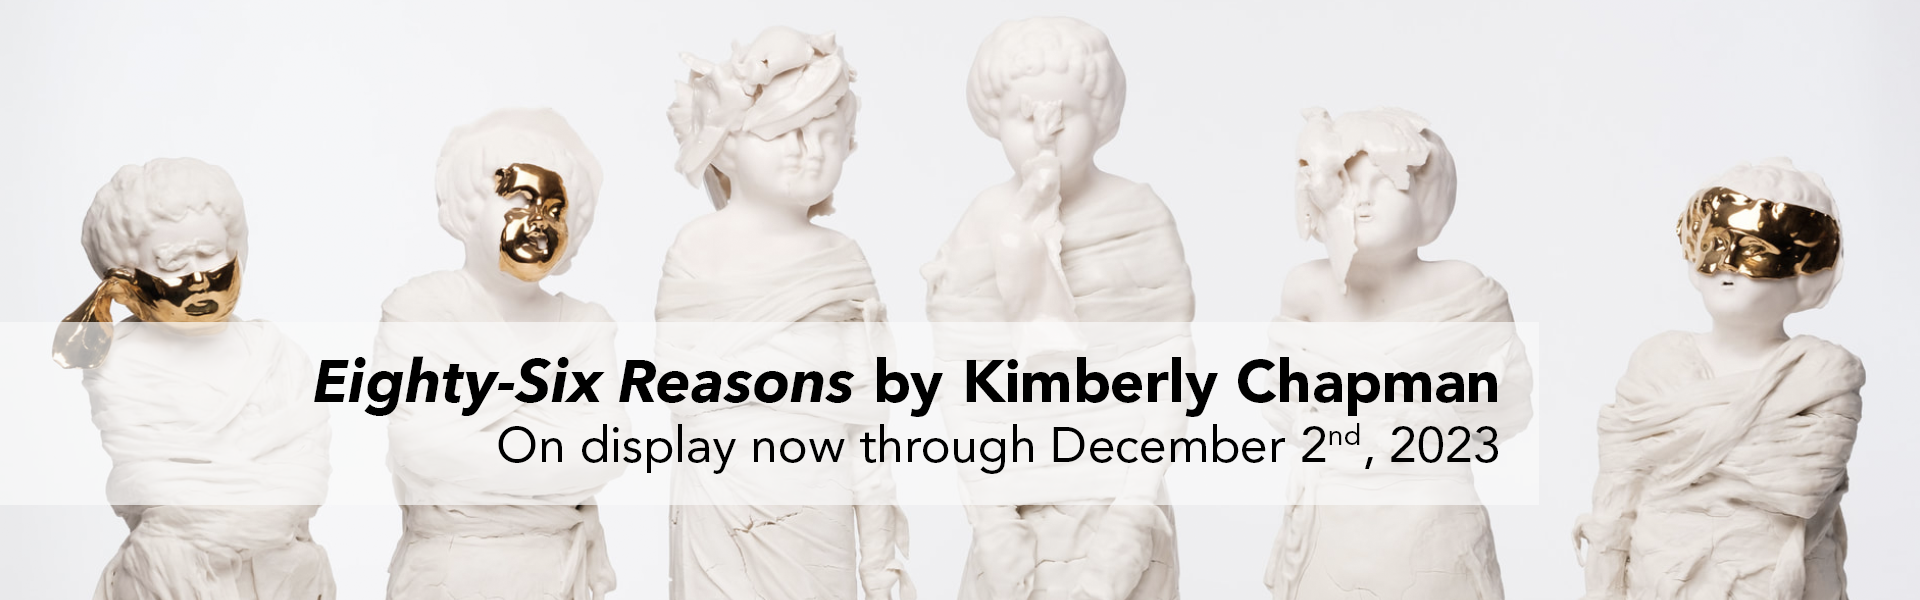 86 Reasons by Kimberly Chapman - Opens August 1st